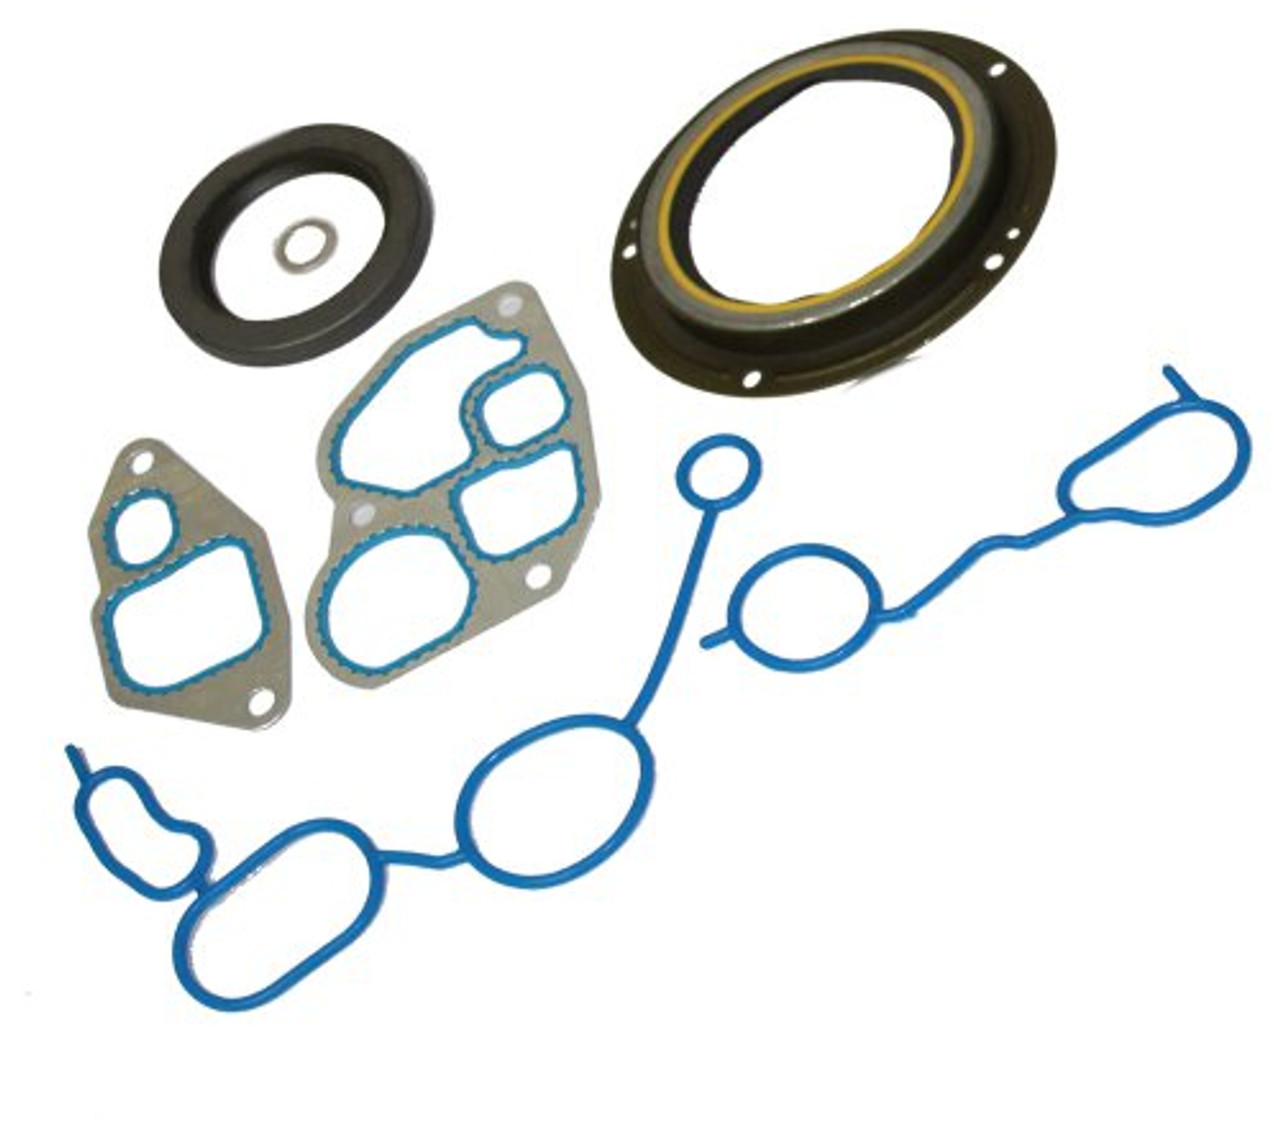 Lower Gasket Set - 1997 Ford F-250 HD 7.3L Engine Parts # LGS4200ZE19